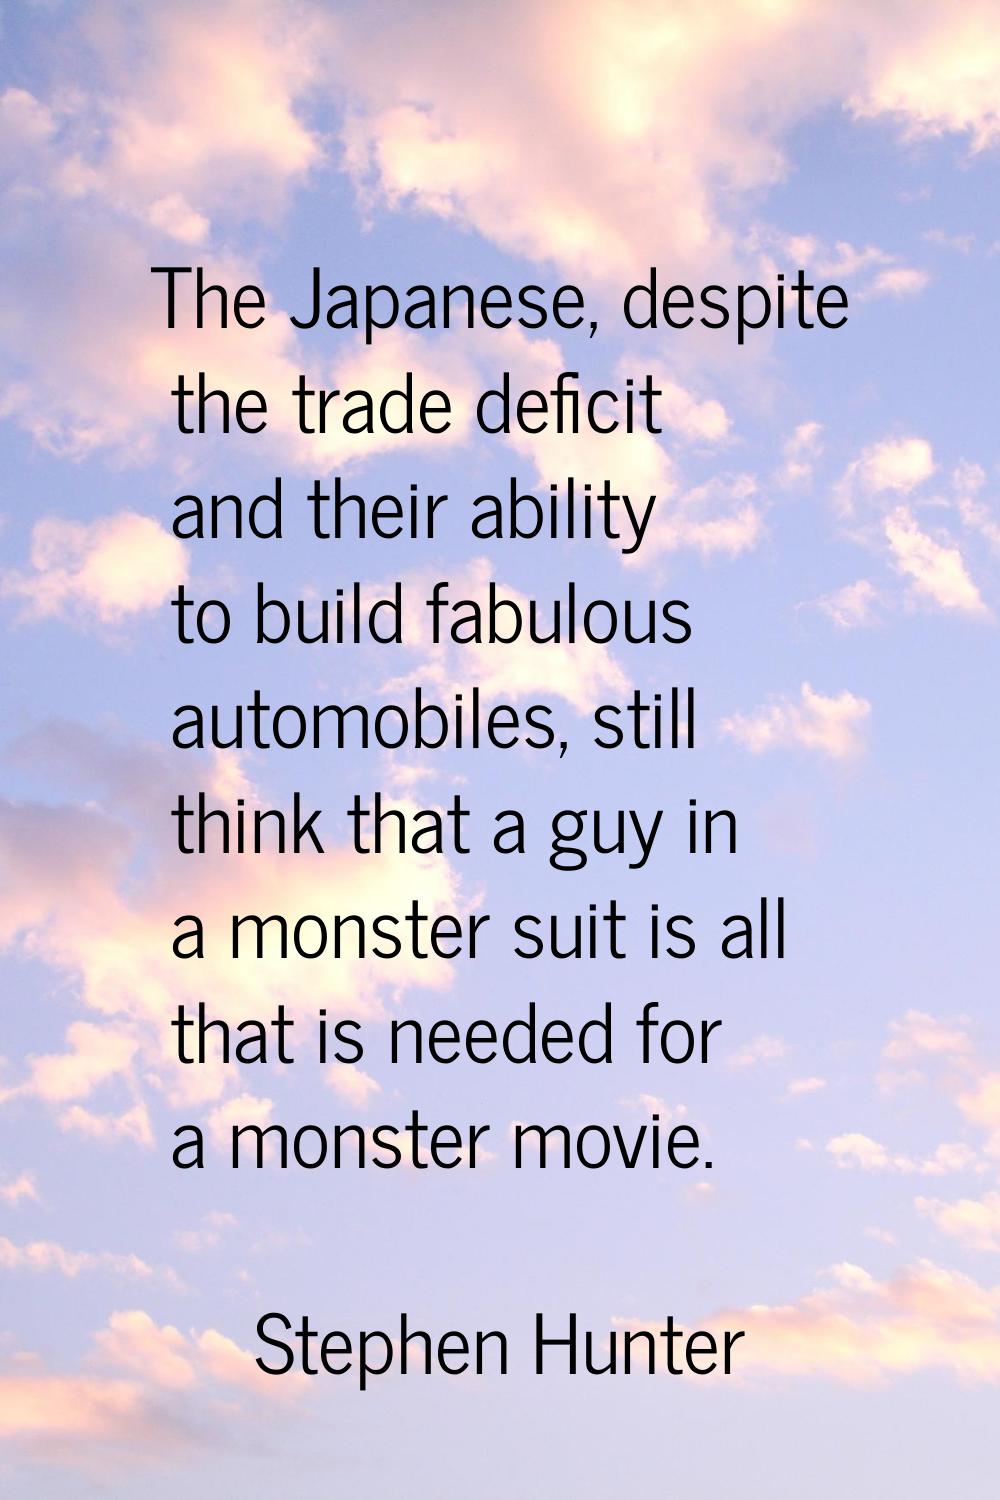 The Japanese, despite the trade deficit and their ability to build fabulous automobiles, still thin